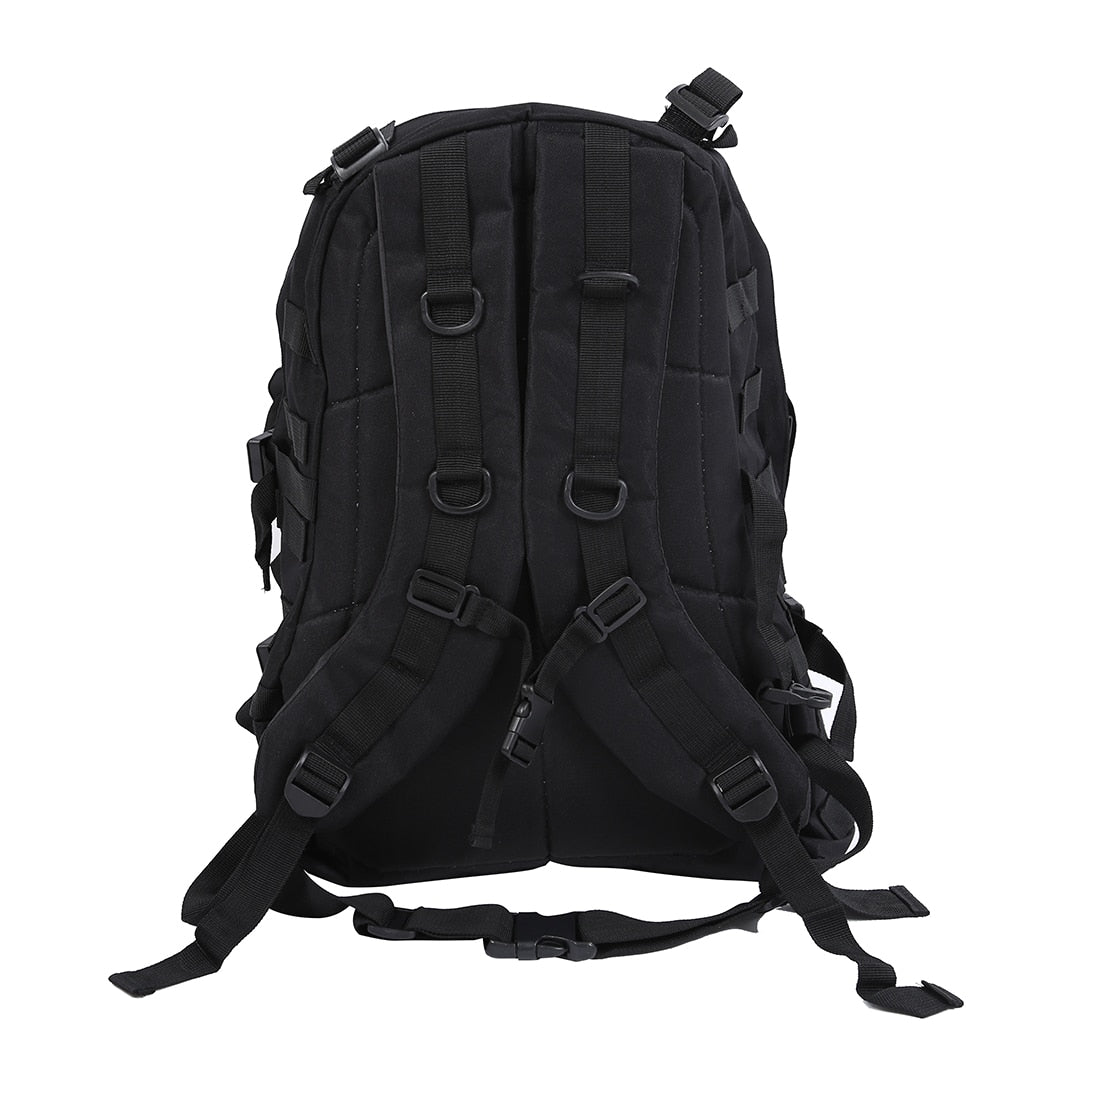 New  40L 600D Waterproof Oxford Cloth Military Rucksack  Backpack Bag ACU Camouflage Casual Travelling  Bag Black - ebowsos